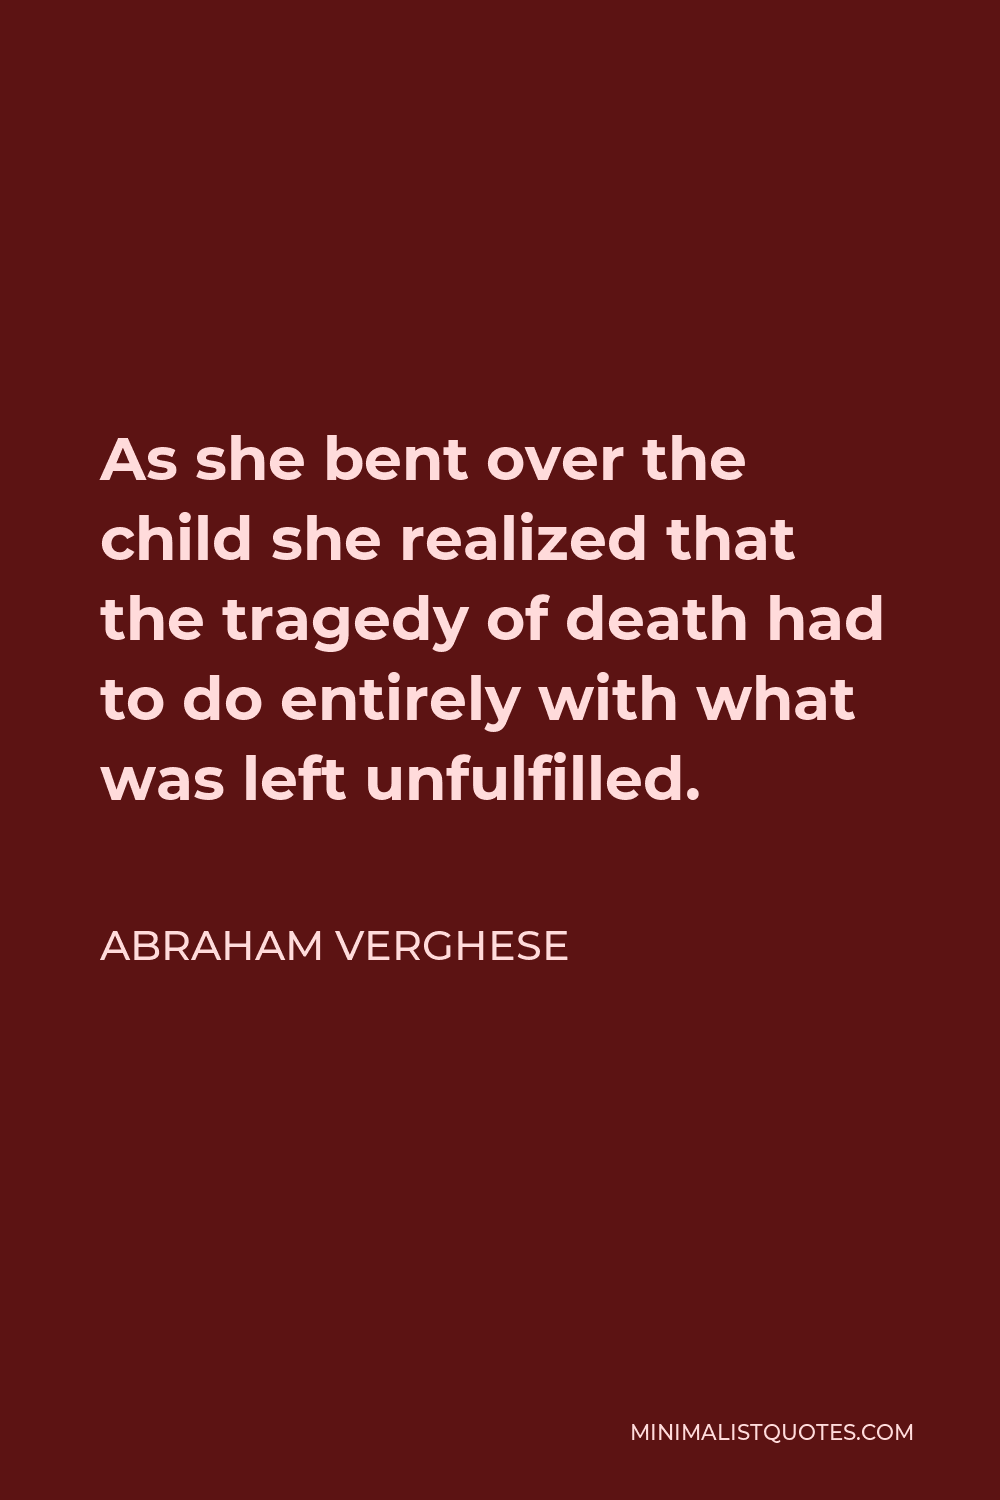 Abraham Verghese Quote - As she bent over the child she realized that the tragedy of death had to do entirely with what was left unfulfilled.